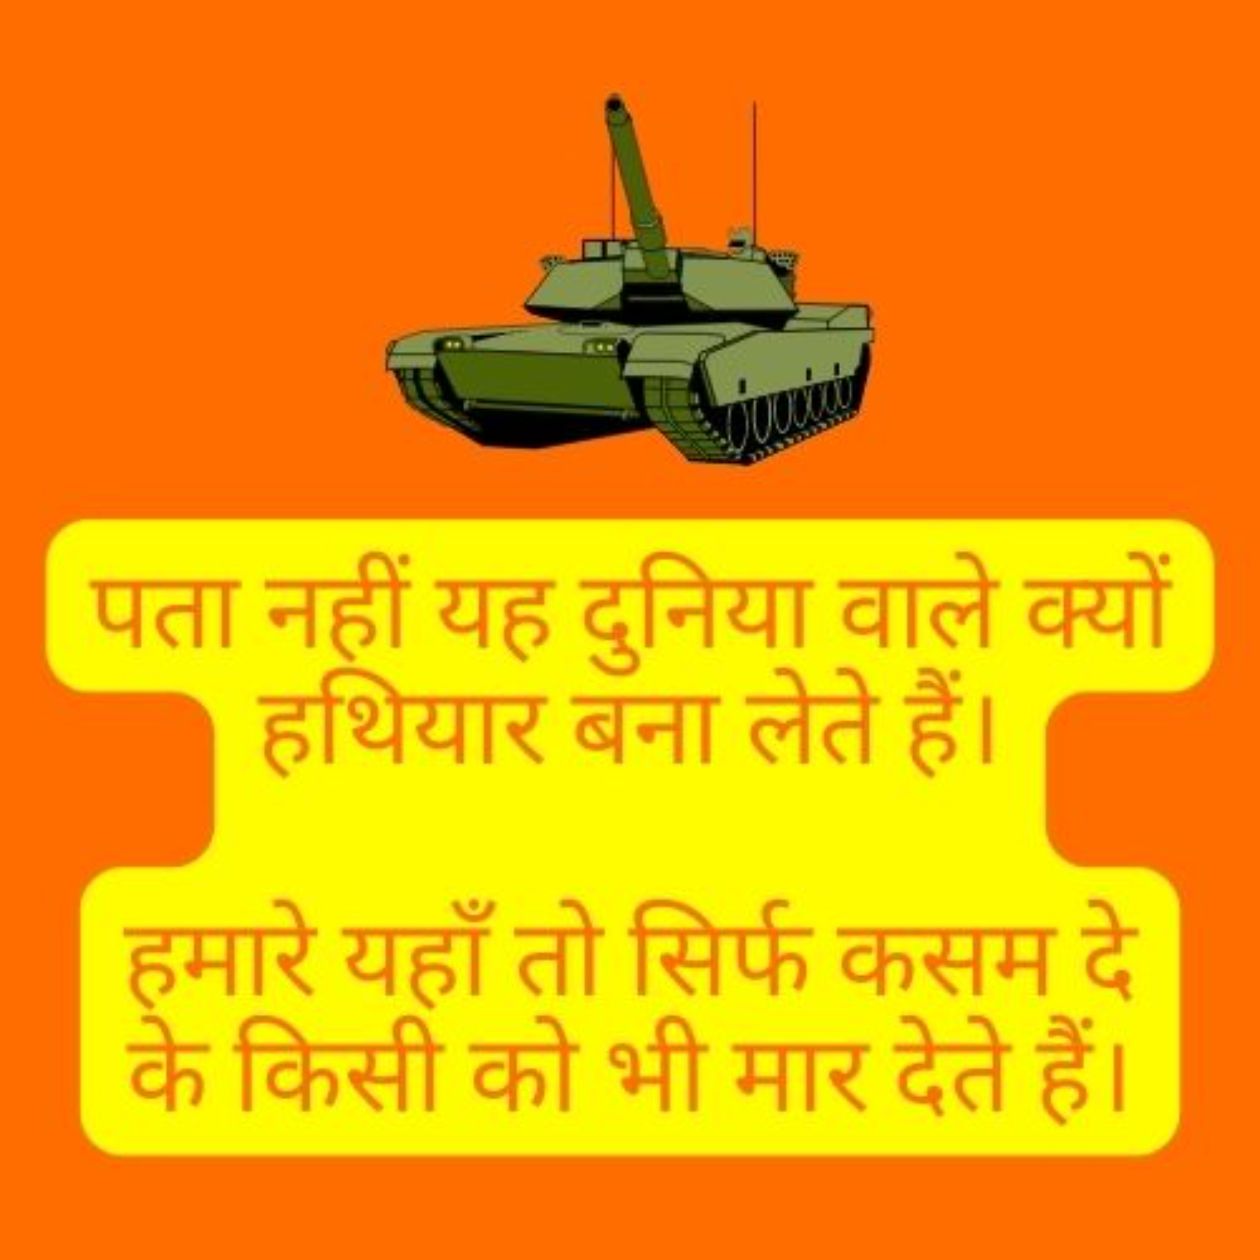 A tank animation and funny text in Hindi about the oath.